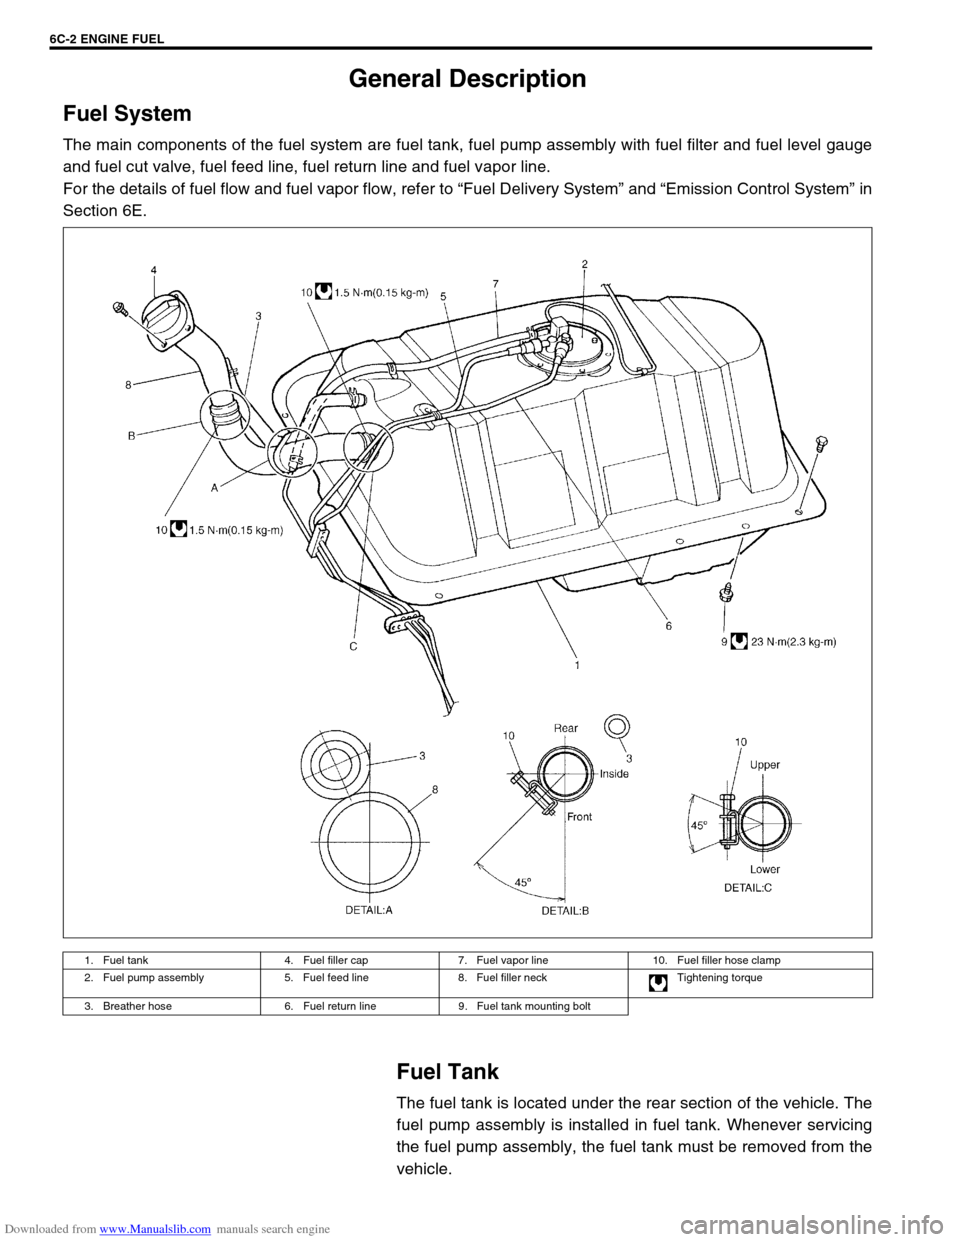 SUZUKI JIMNY 2005 3.G Service Owners Manual Downloaded from www.Manualslib.com manuals search engine 6C-2 ENGINE FUEL
General Description
Fuel System
The main components of the fuel system are fuel tank, fuel pump assembly with fuel filter and 